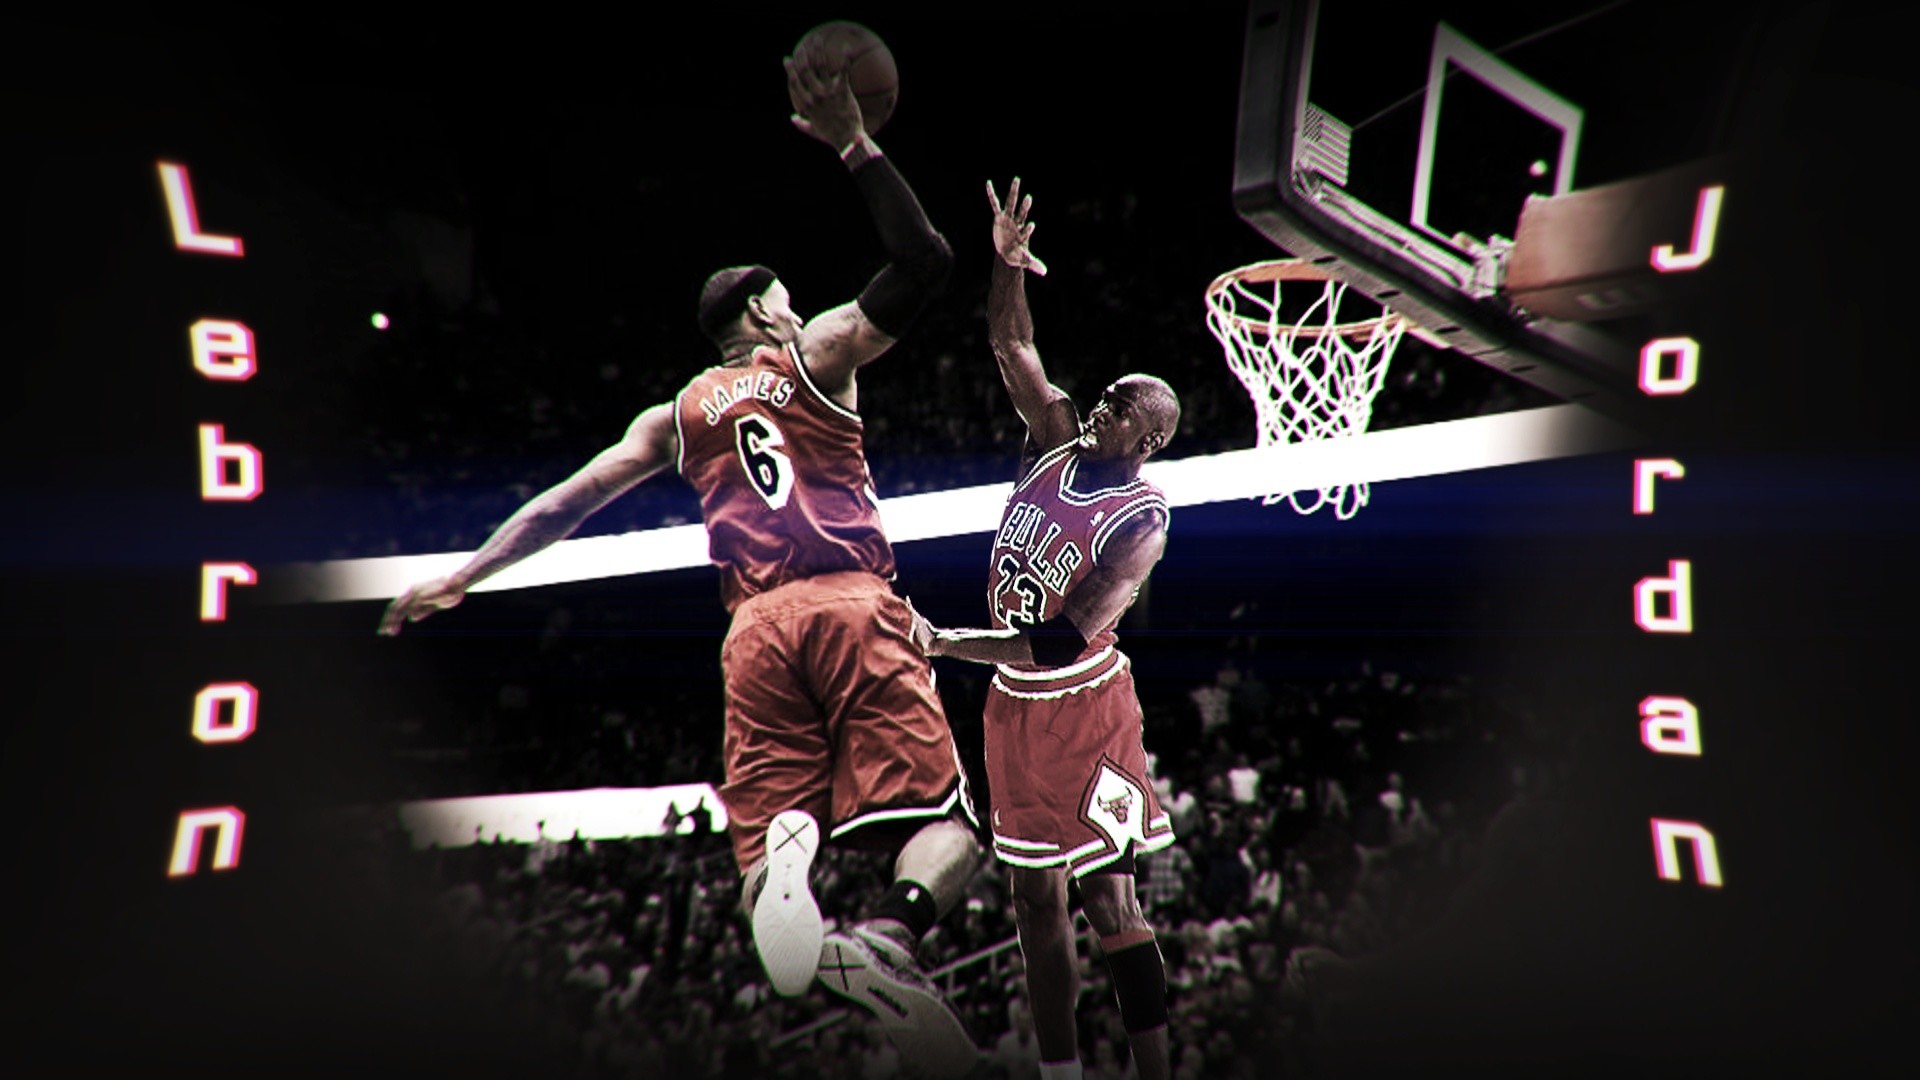 1920x1080 Kobe Bryant Dunk On Lebron James Wallpaper Phone Is Cool Wallpapers